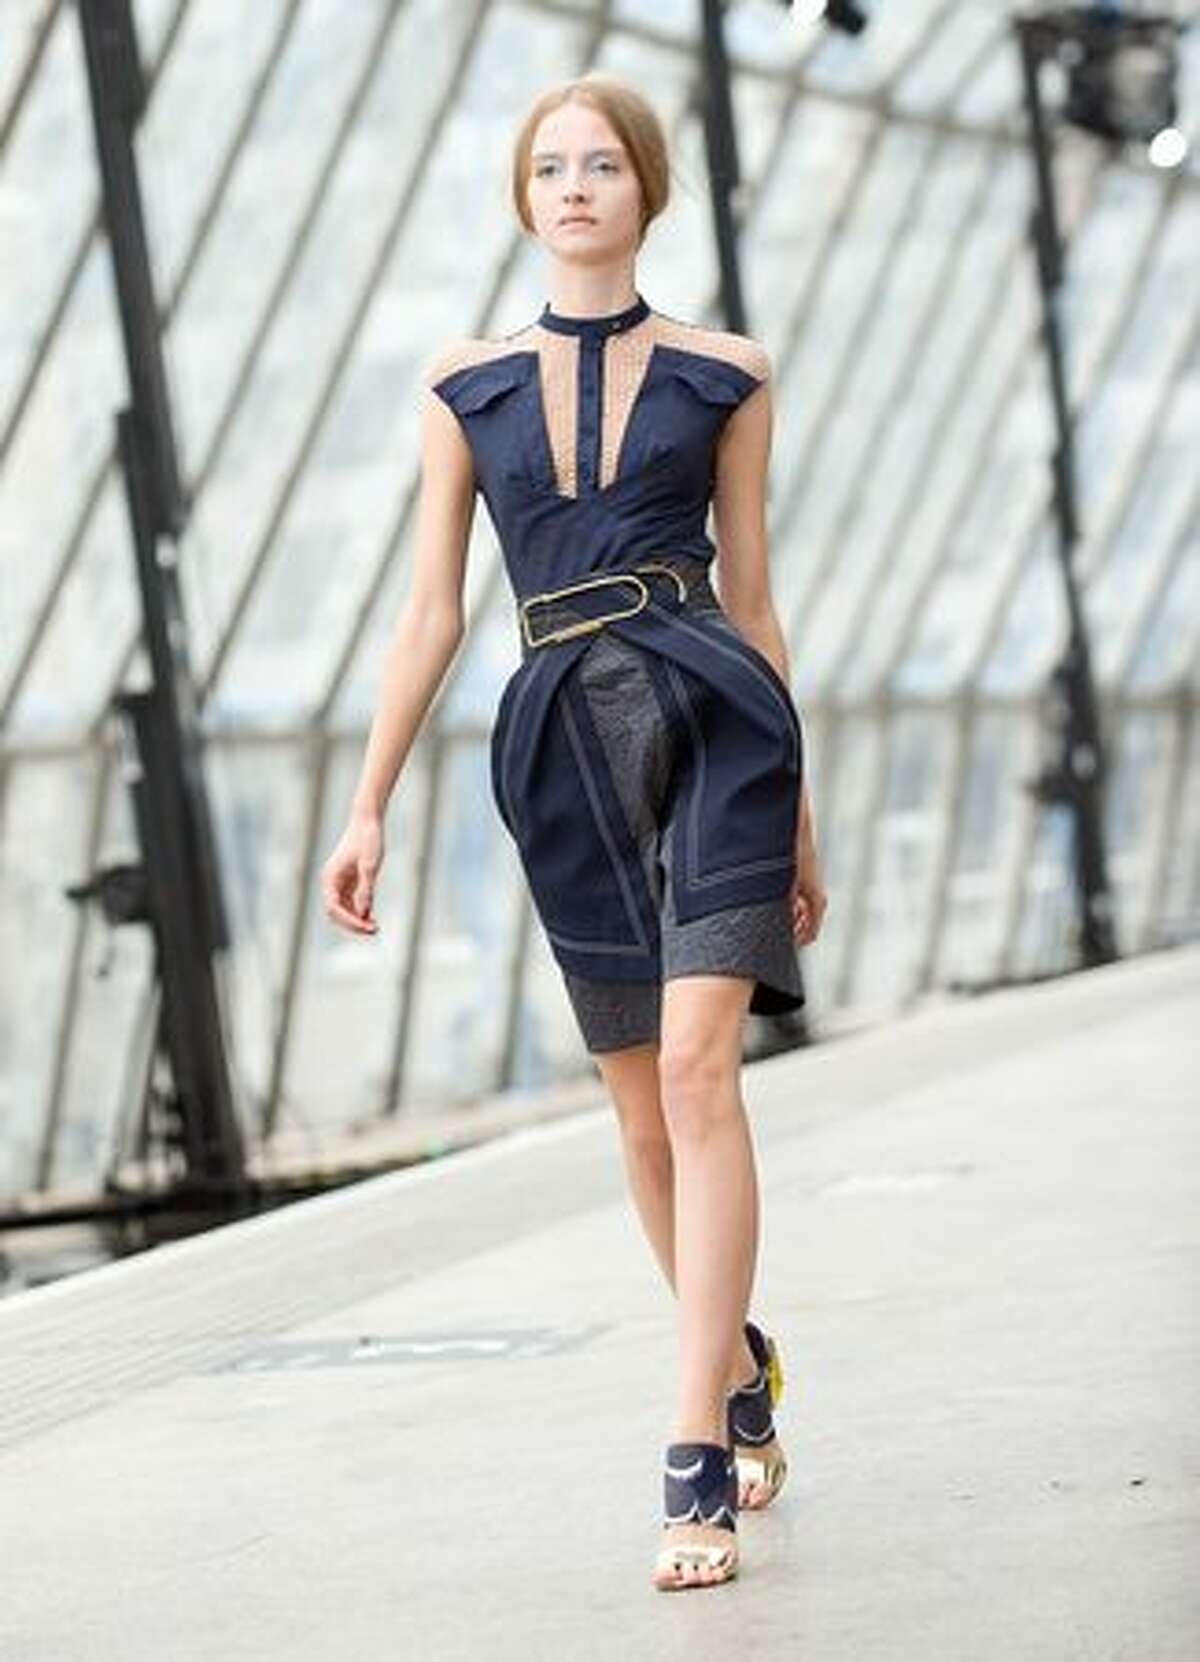 A model walks the catwalk at the Peter Pilotto fashion show.